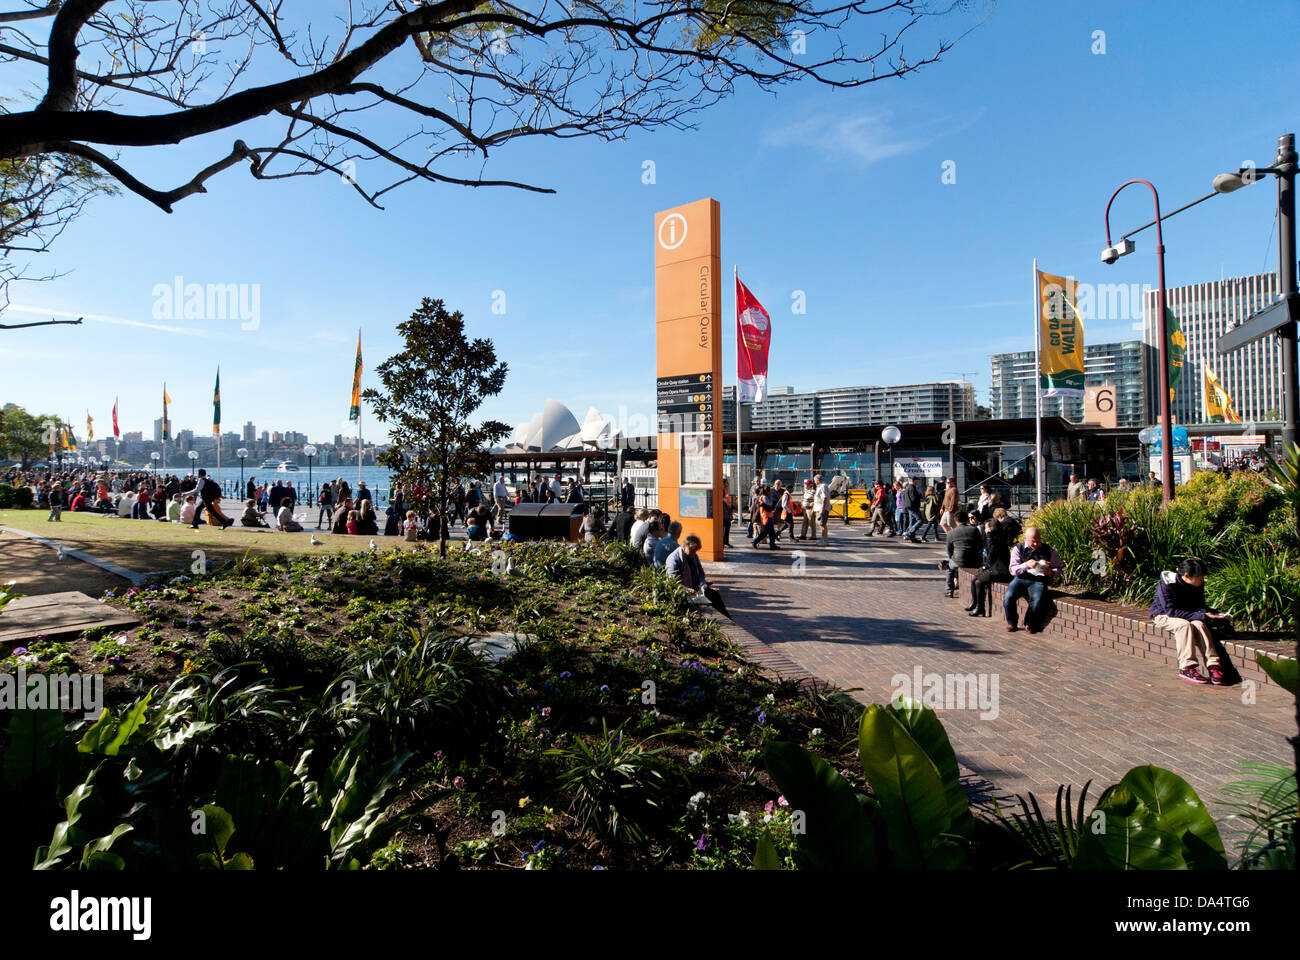 A view of Circular Quay from First Fleet Park, showing directional signage, banners and tourists. Stock Photo